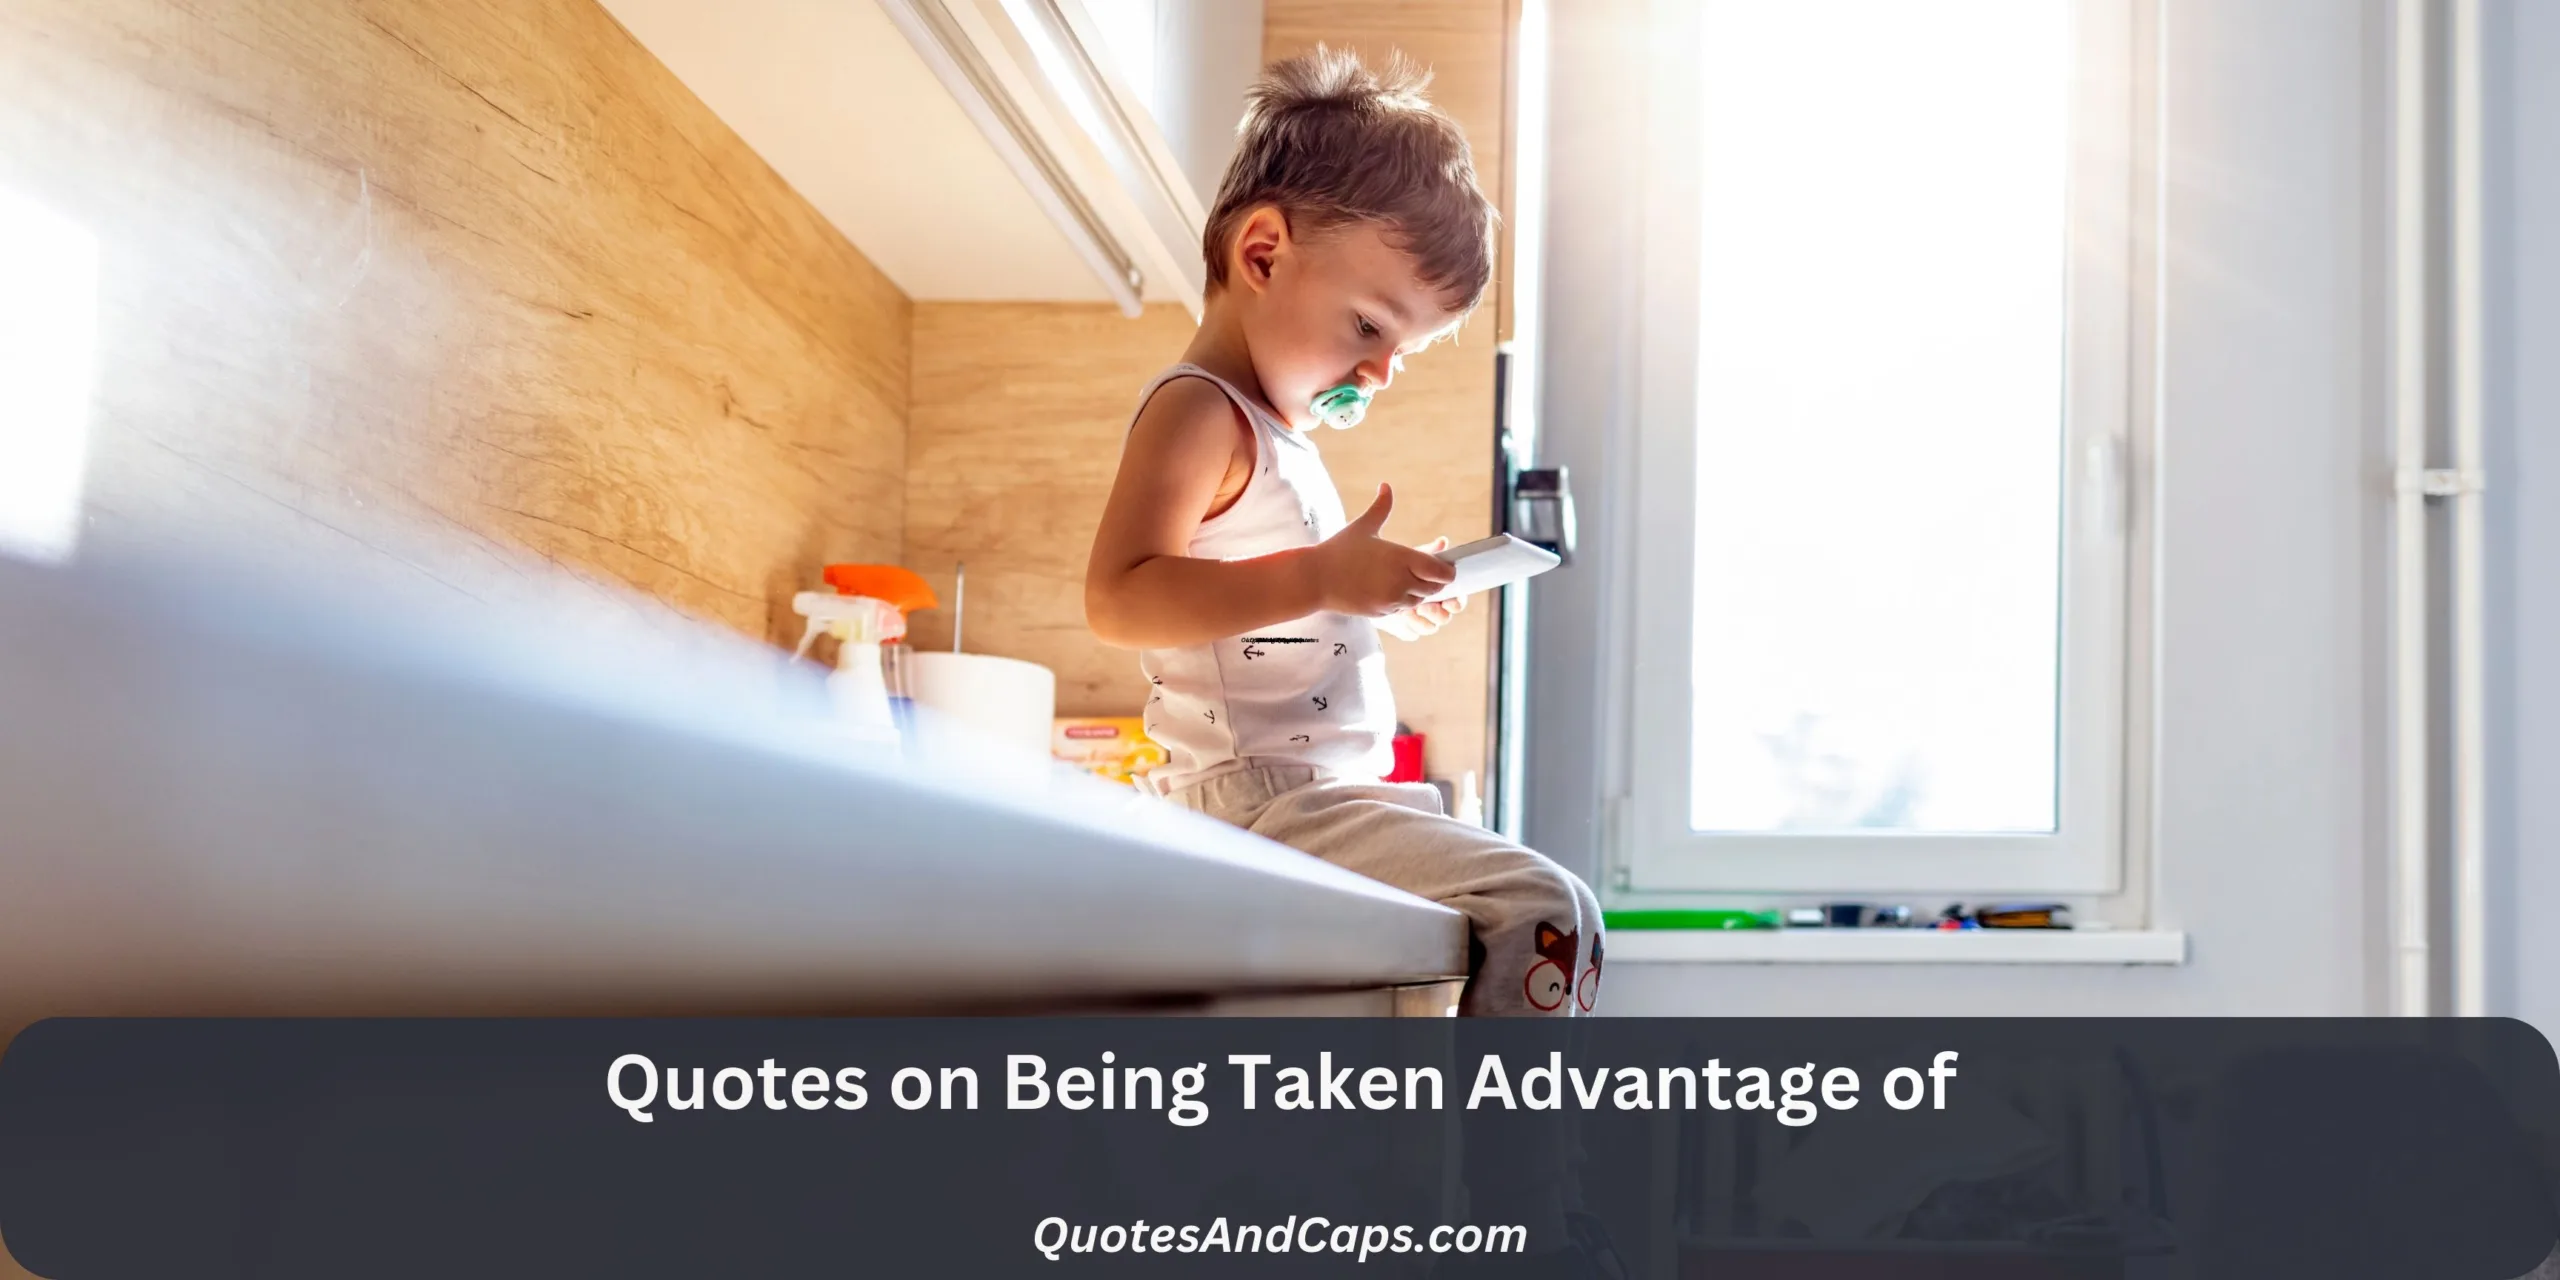 Quotes on Being Taken Advantage of